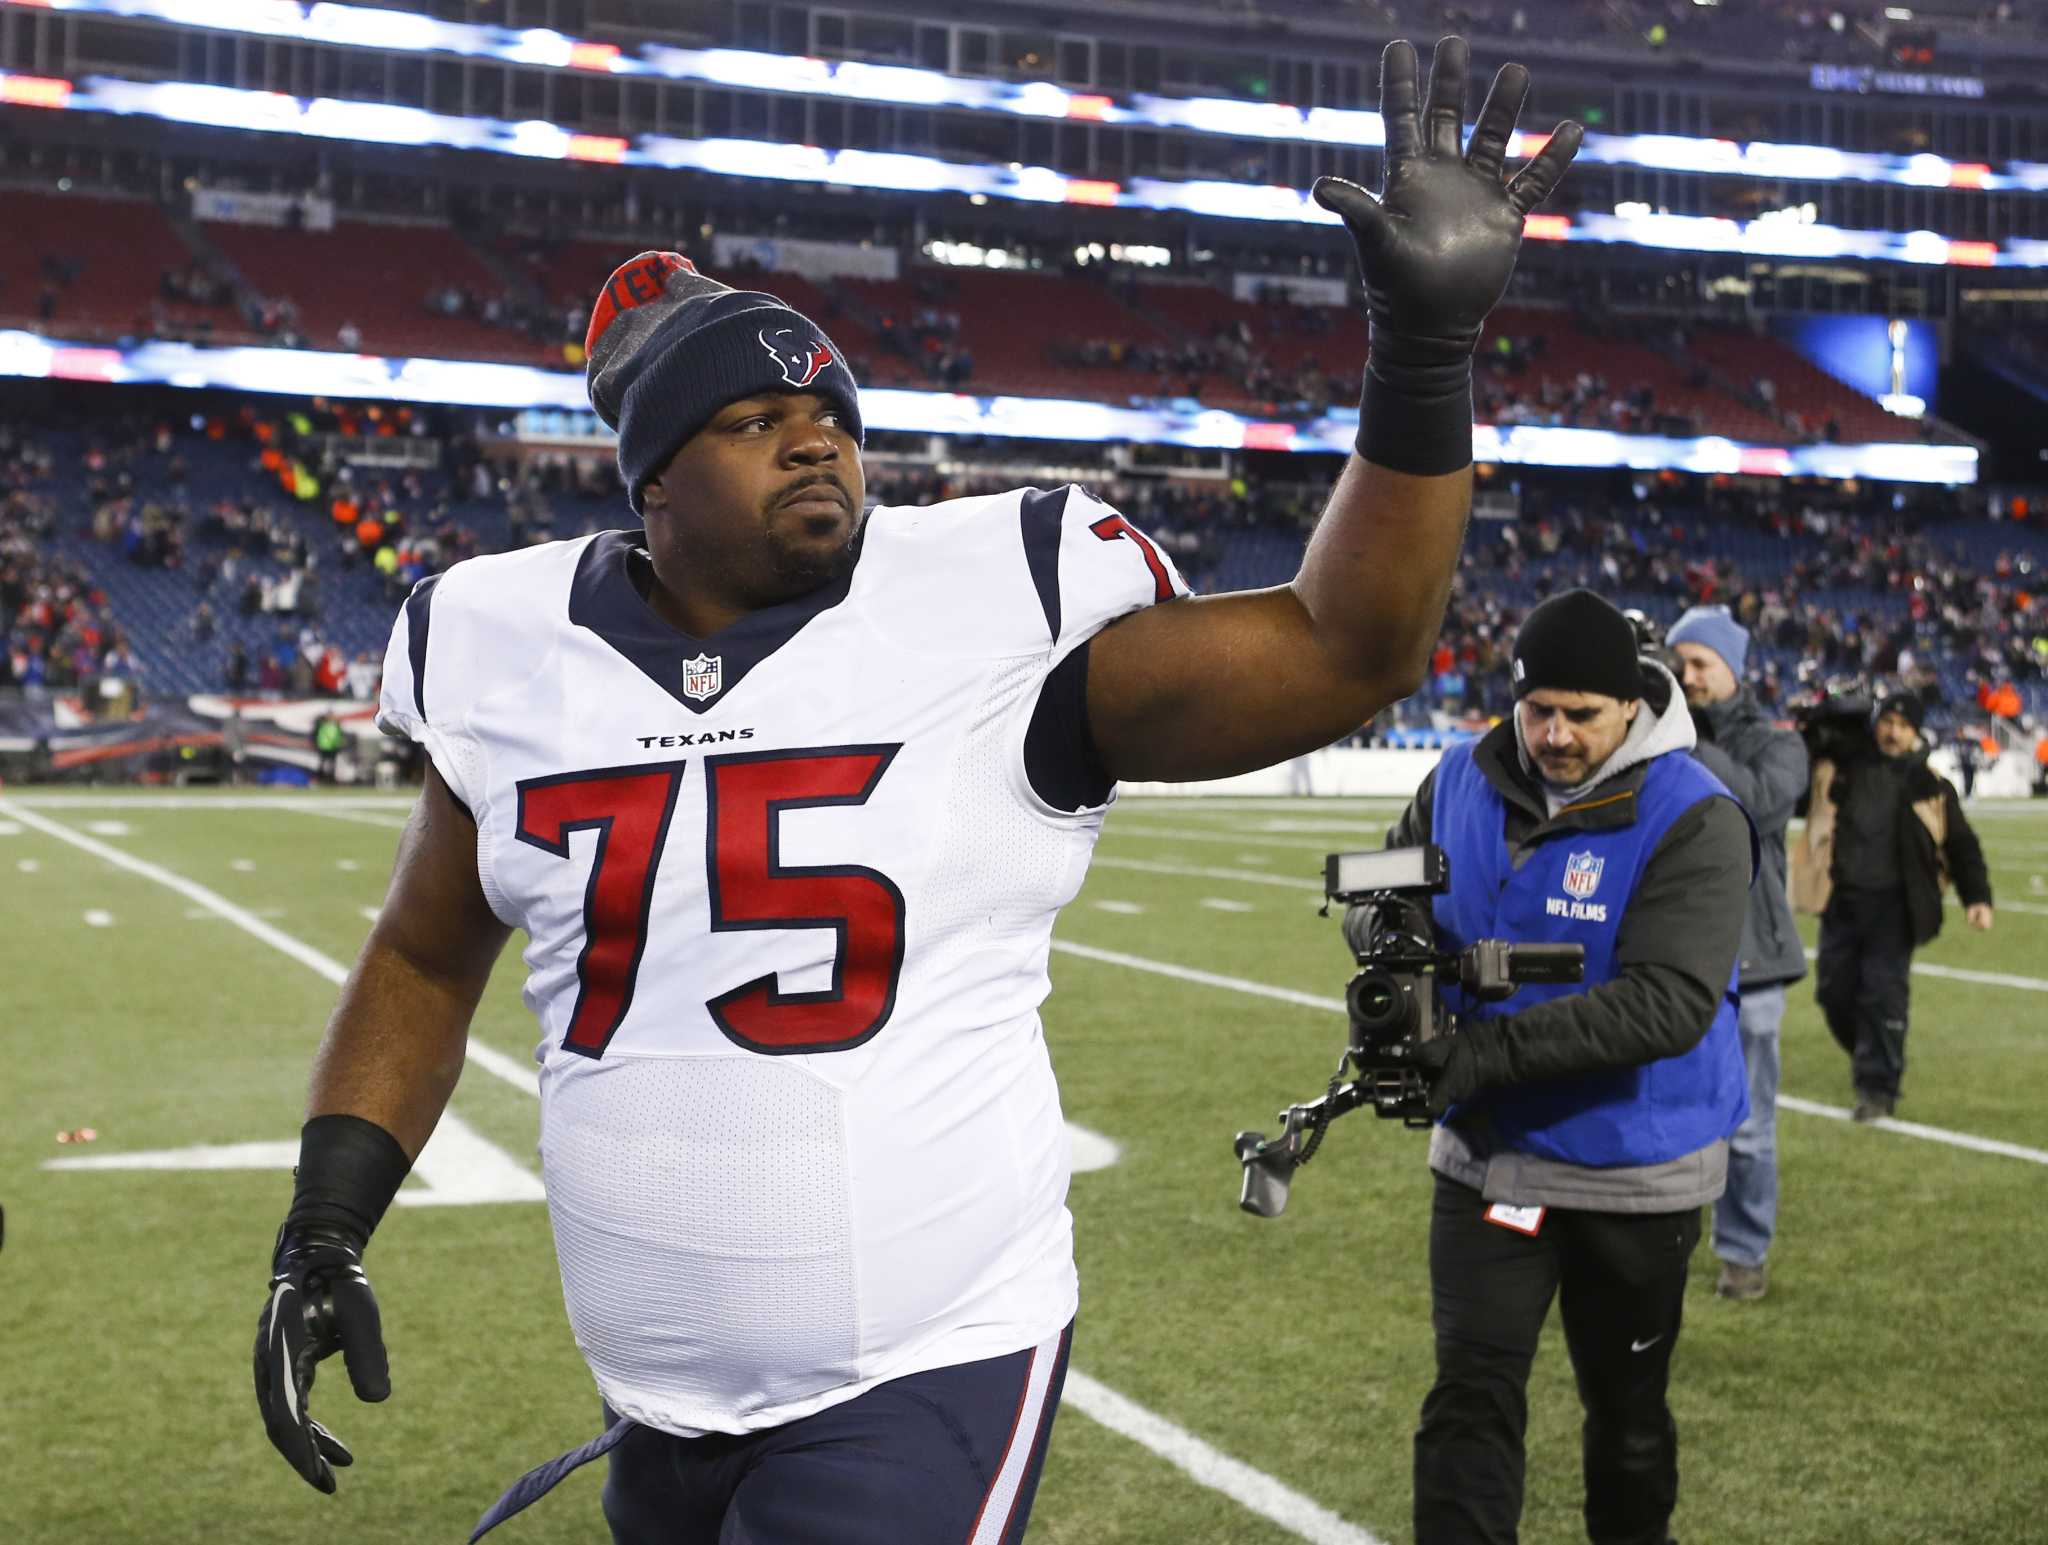 Former Patriots standout Wilfork officially retires from NFL